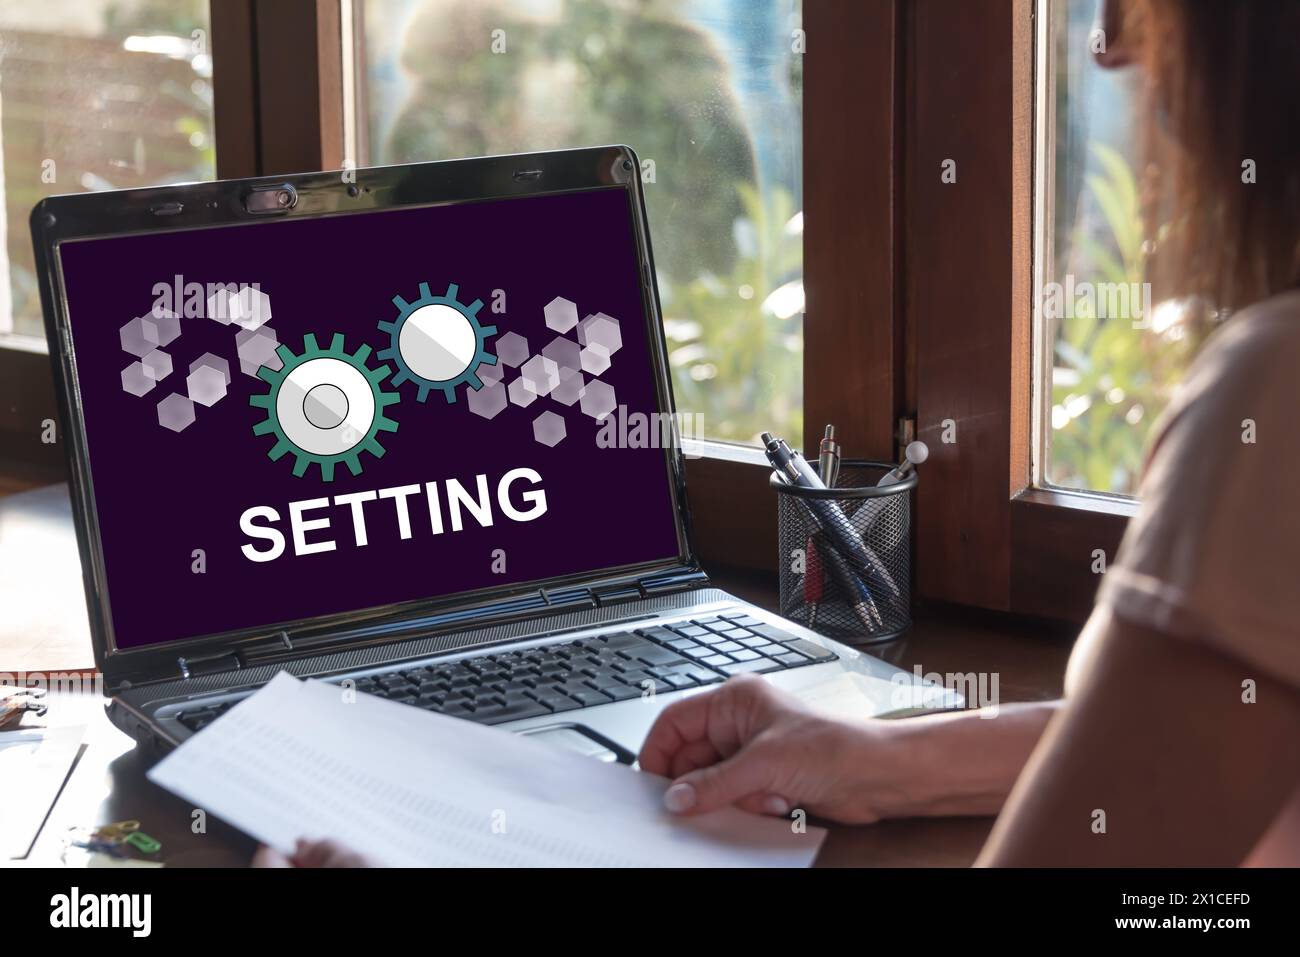 Laptop screen displaying a setting concept Stock Photo